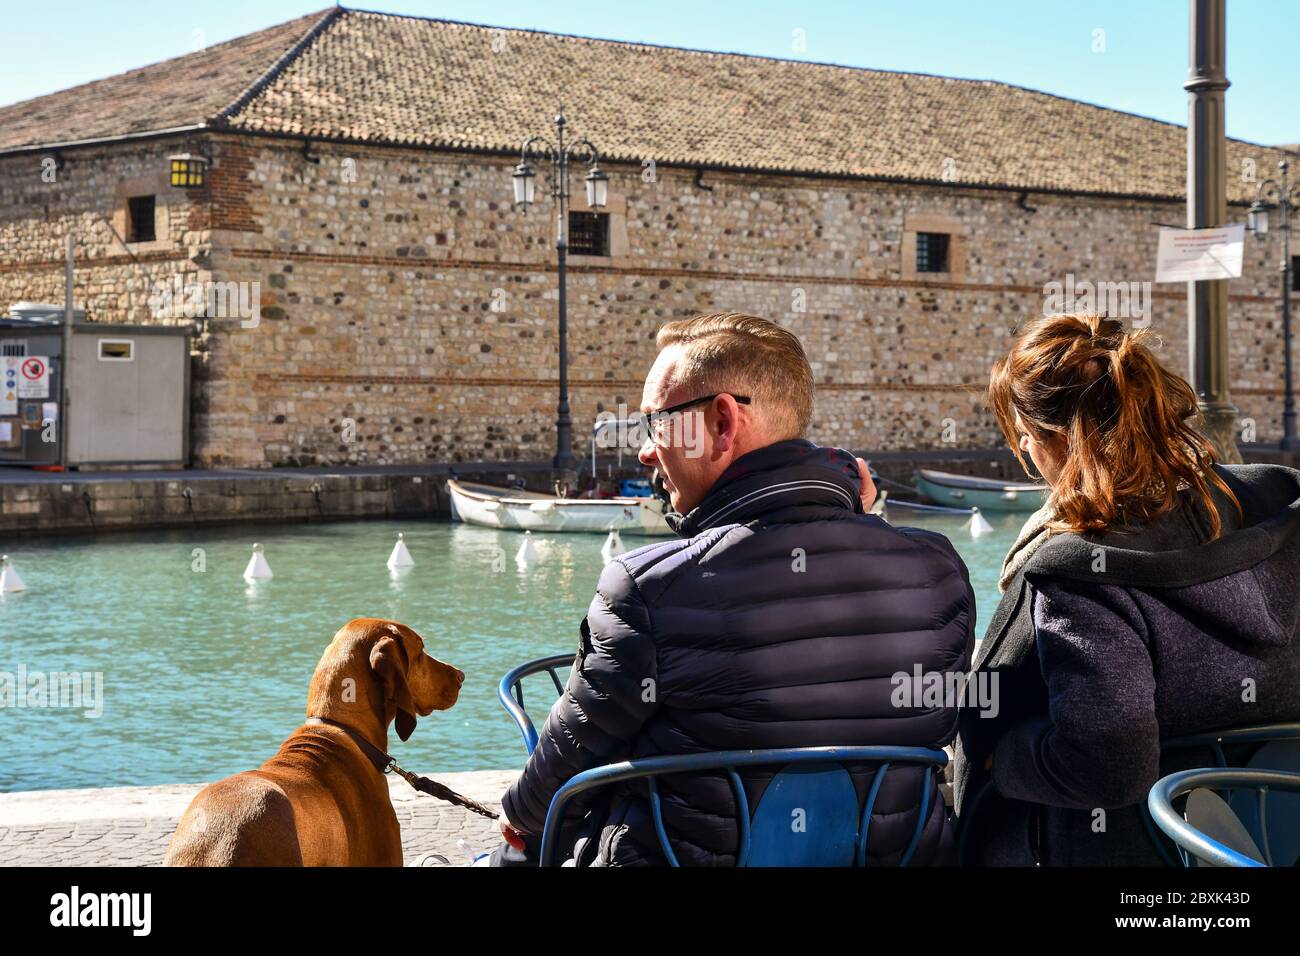 A couple with their dog in an outdoor cafe overlooking the canal, with the Venetian Customhouse in the background, Lazise, Verona, Veneto, Italy Stock Photo